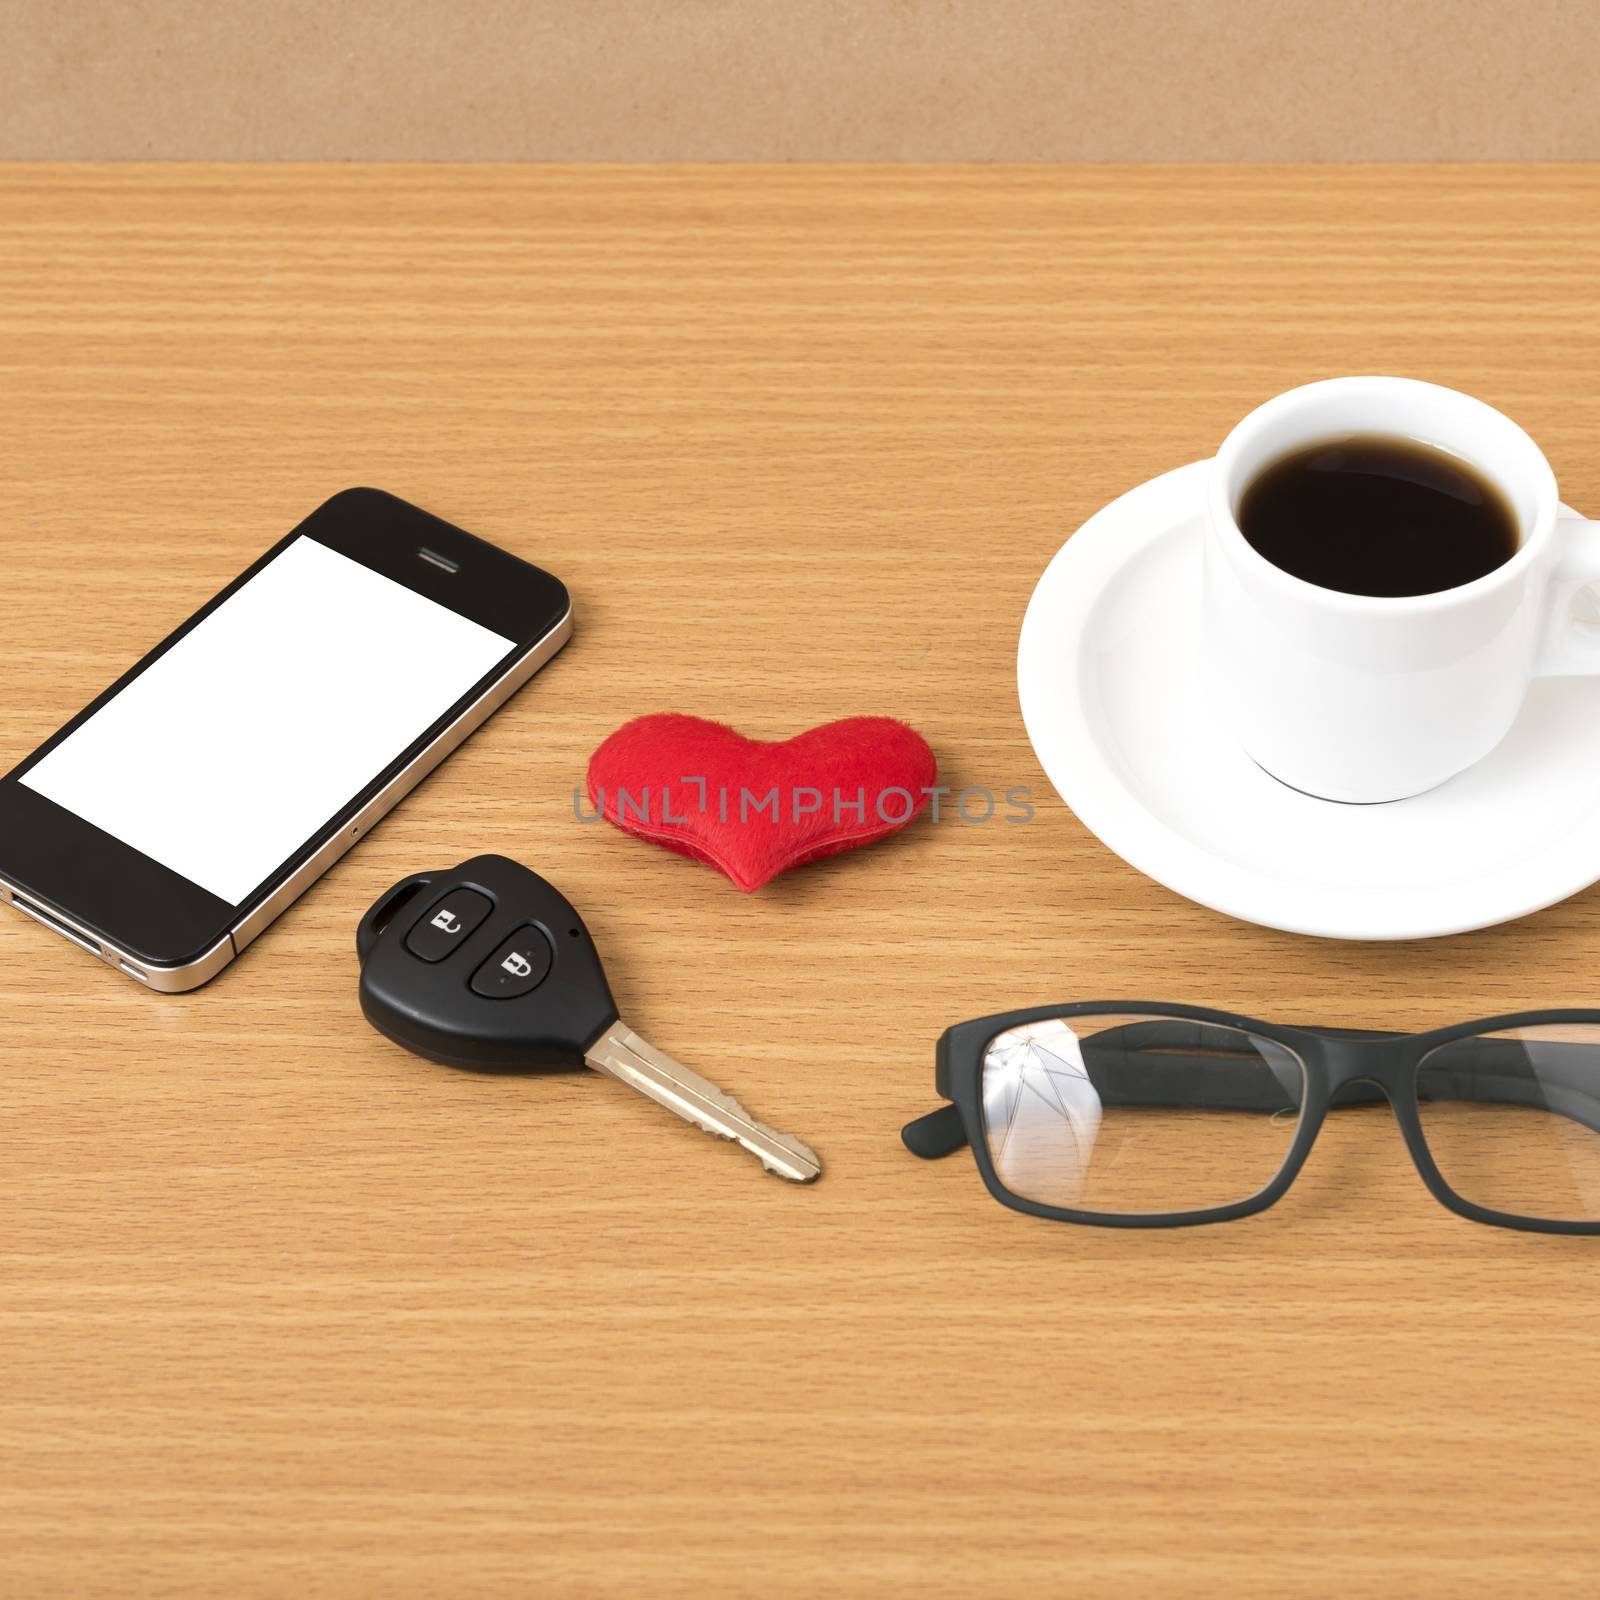 coffee,phone,eyeglasses and car key on wood table background